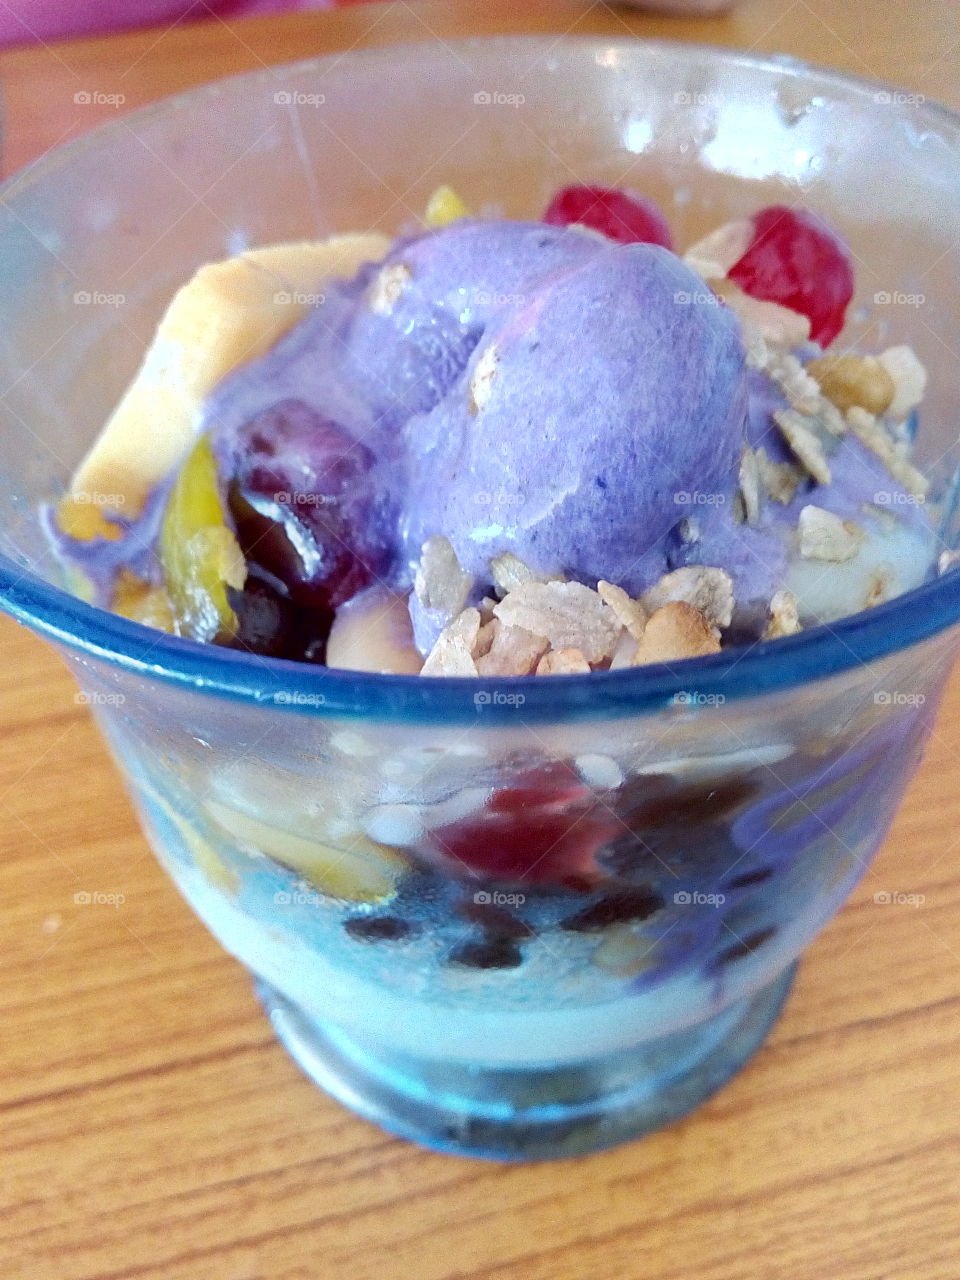 Famous "Halo-Halo" from Philippines.